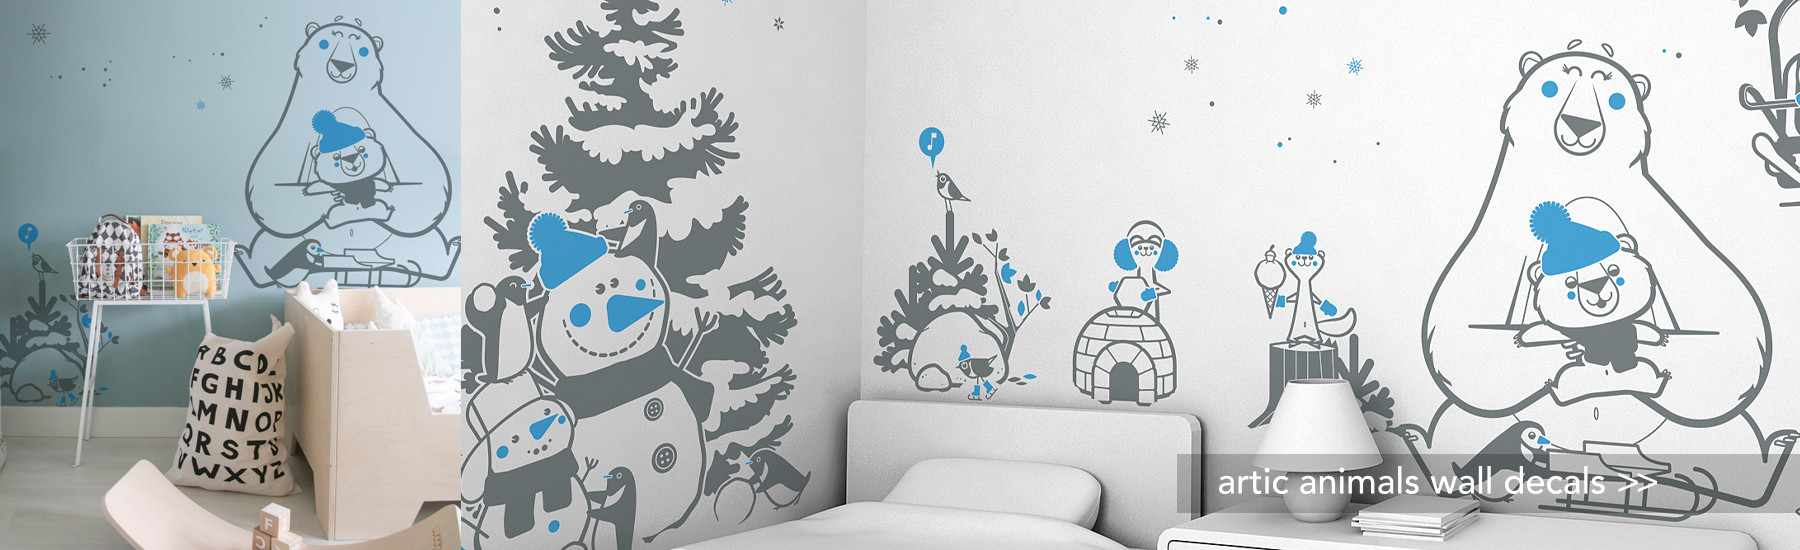 Arctic Animals Wall Decals For Kids Room Deco Mural Chambre Bebe 1800x550 Wallpaper Teahub Io